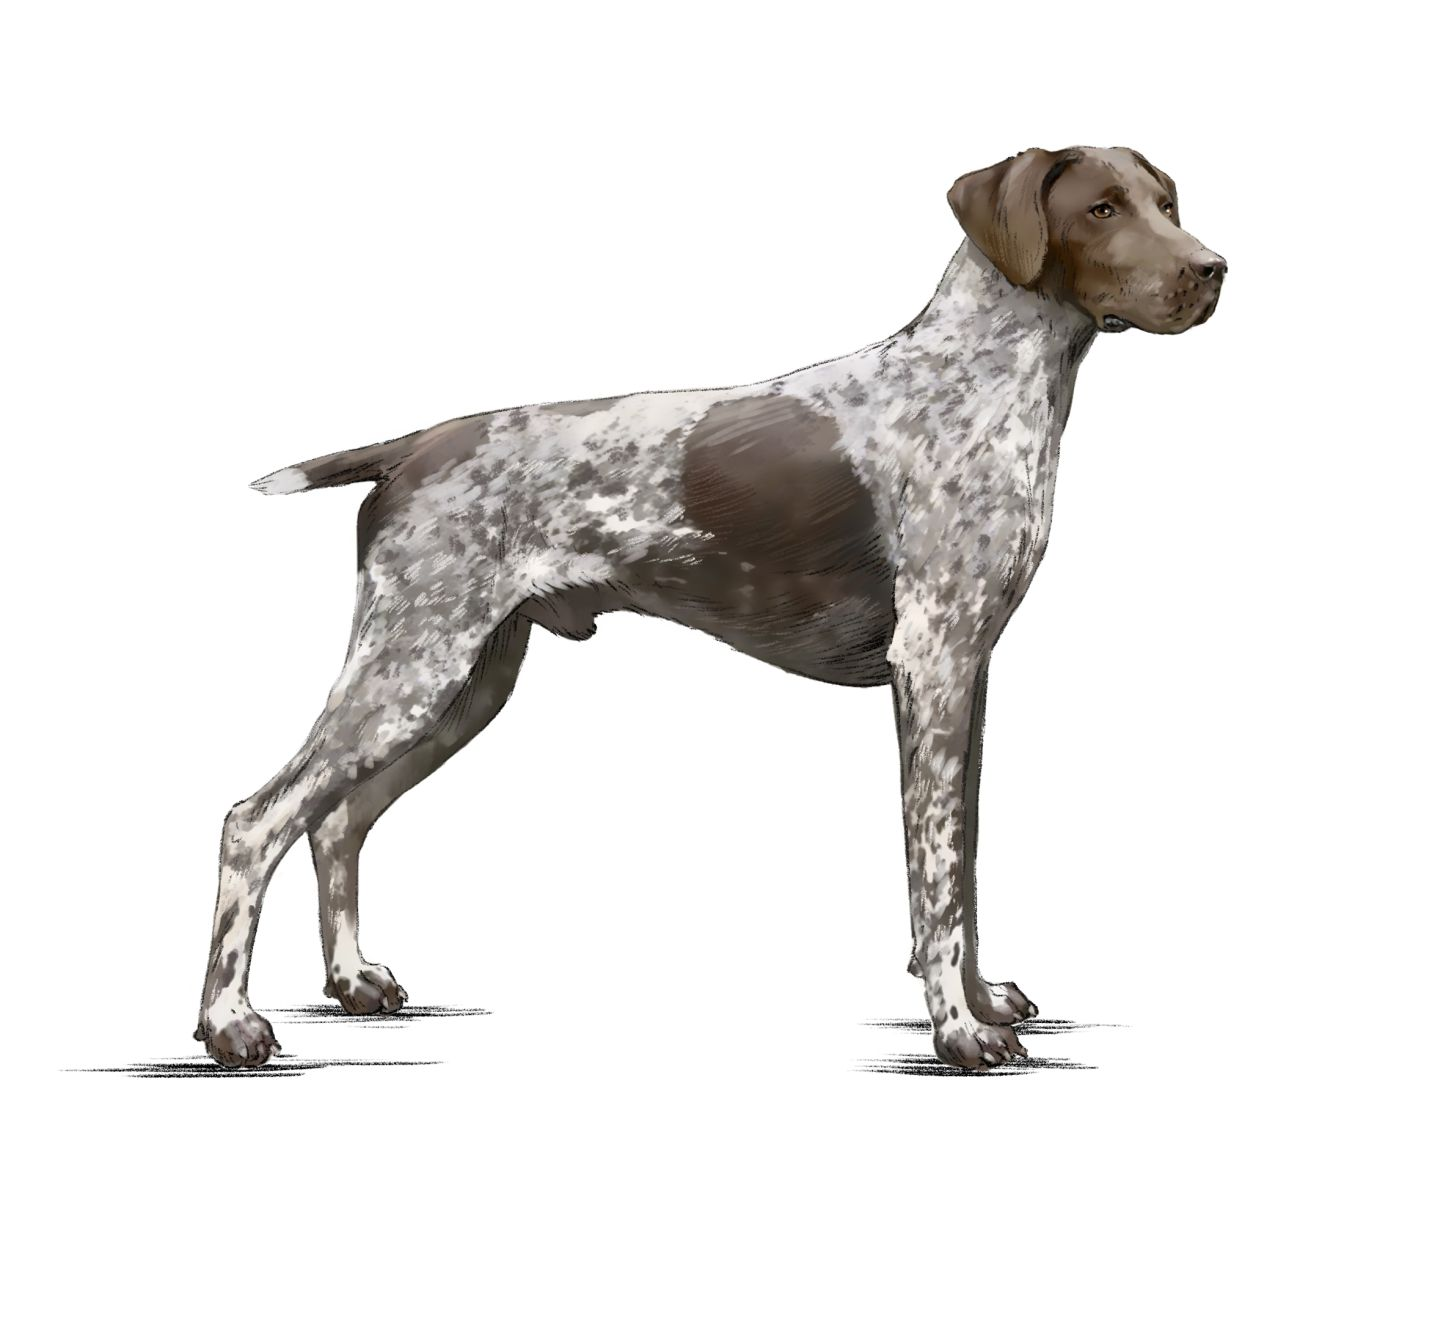 German Short-Haired Pointing Dog